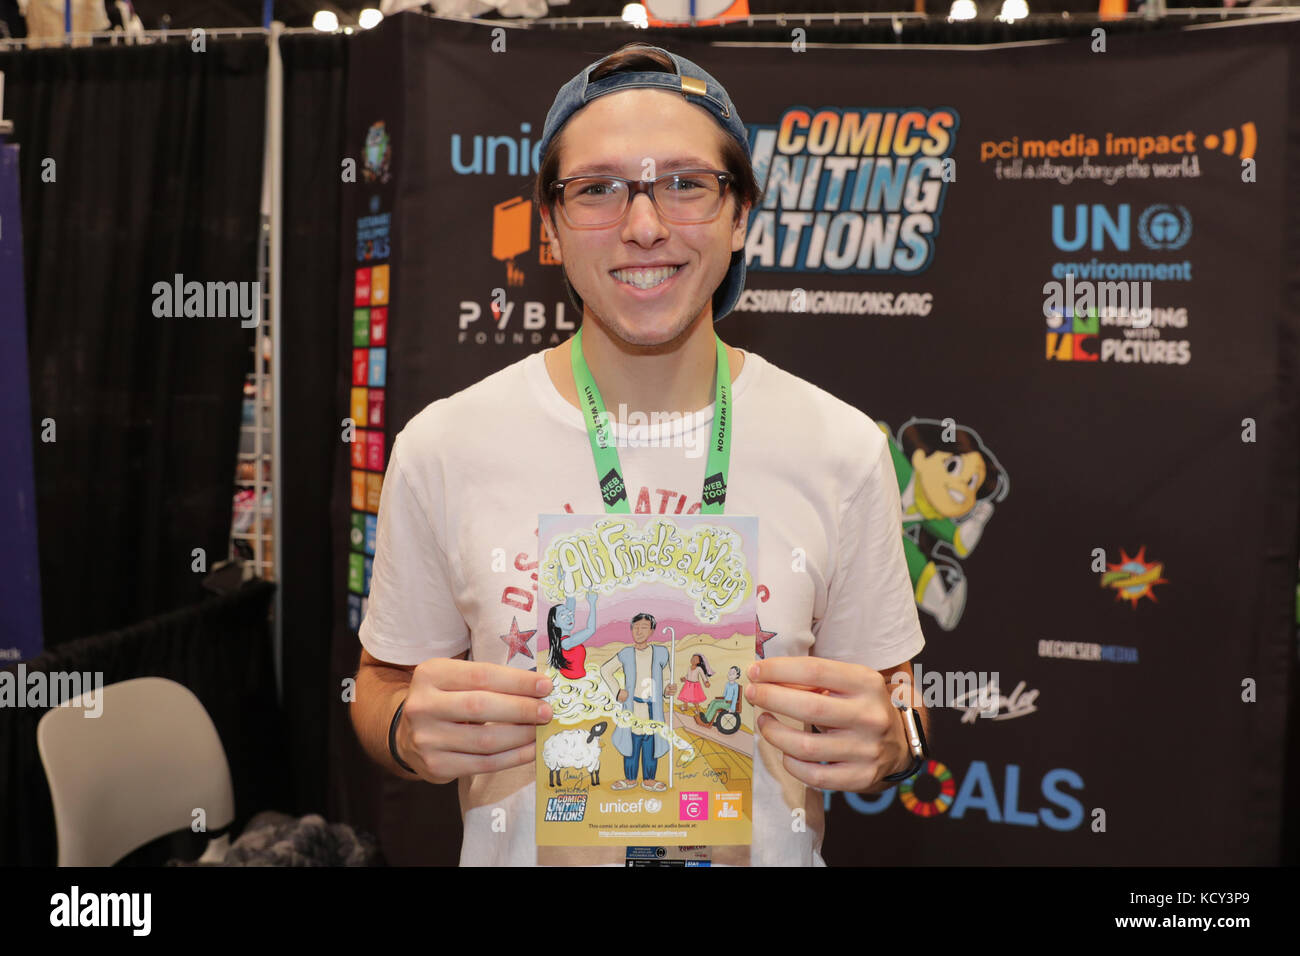 New York, NY, USA. 7th Oct, 2017. Javits Convention Center, New York, USA, October 07 2017 - Comics Uniting Nations During the 3rd Day of the 2017 New York Comic Con today in New York City.Photo: Luiz Rampelotto/EuropaNewswire Credit: Luiz Rampelotto/ZUMA Wire/Alamy Live News Stock Photo